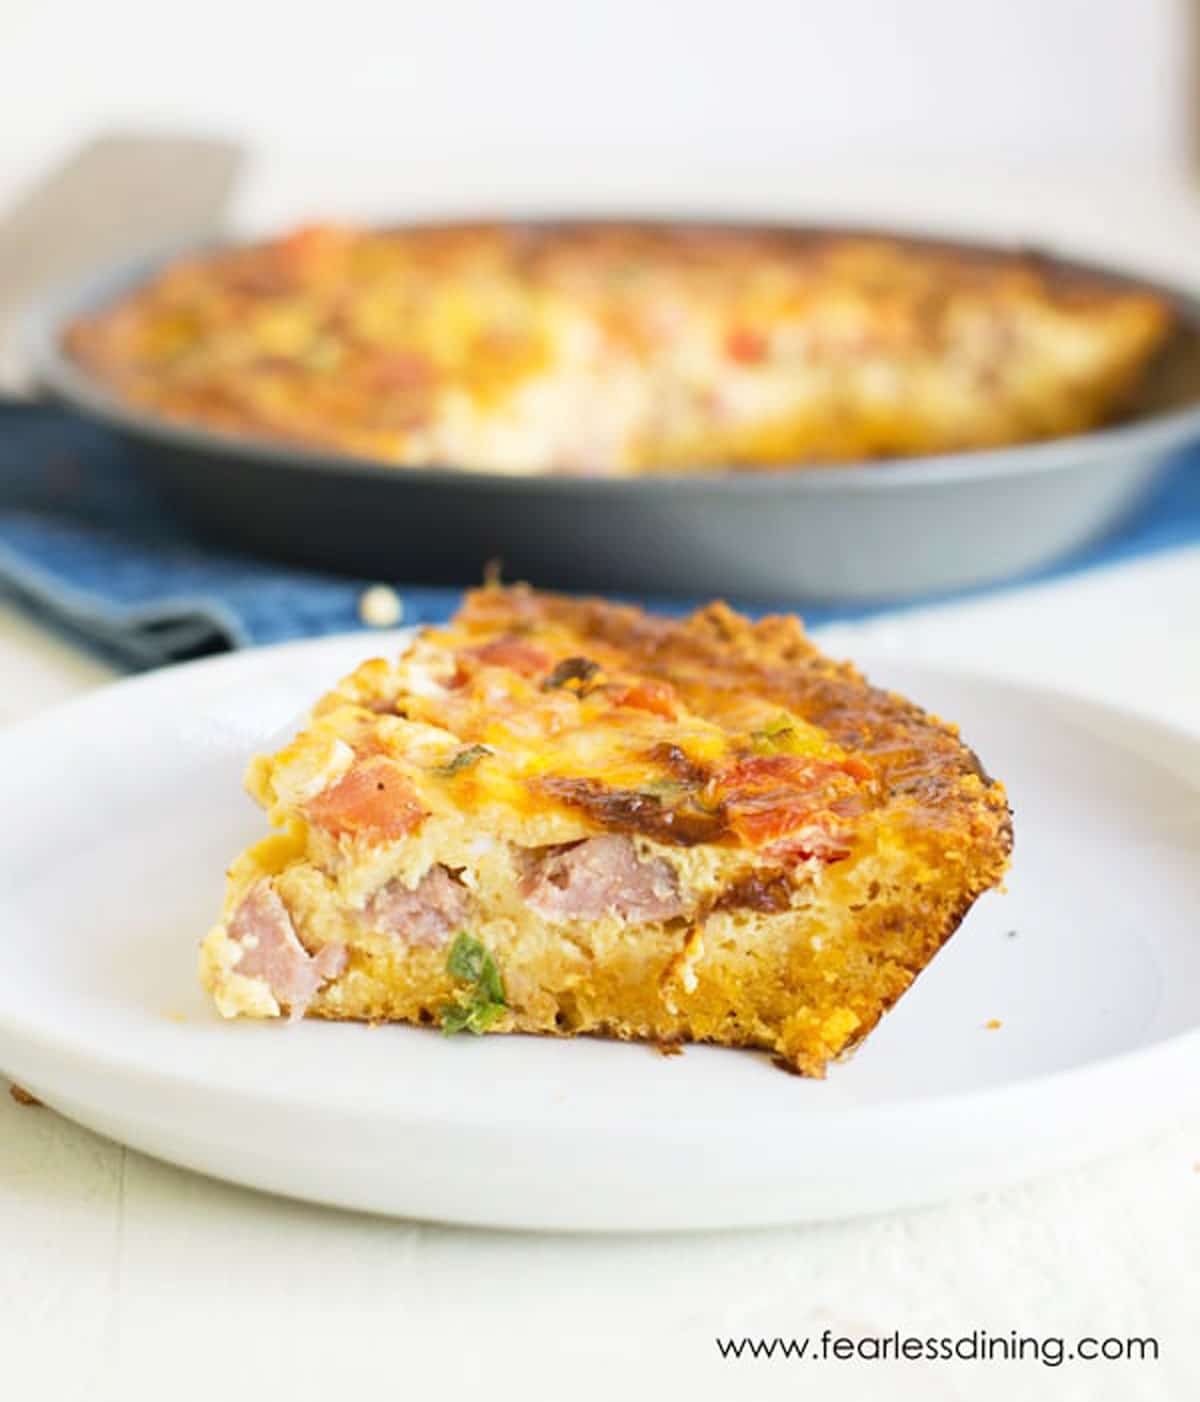 a slice of quiche on a white plate next to the pan